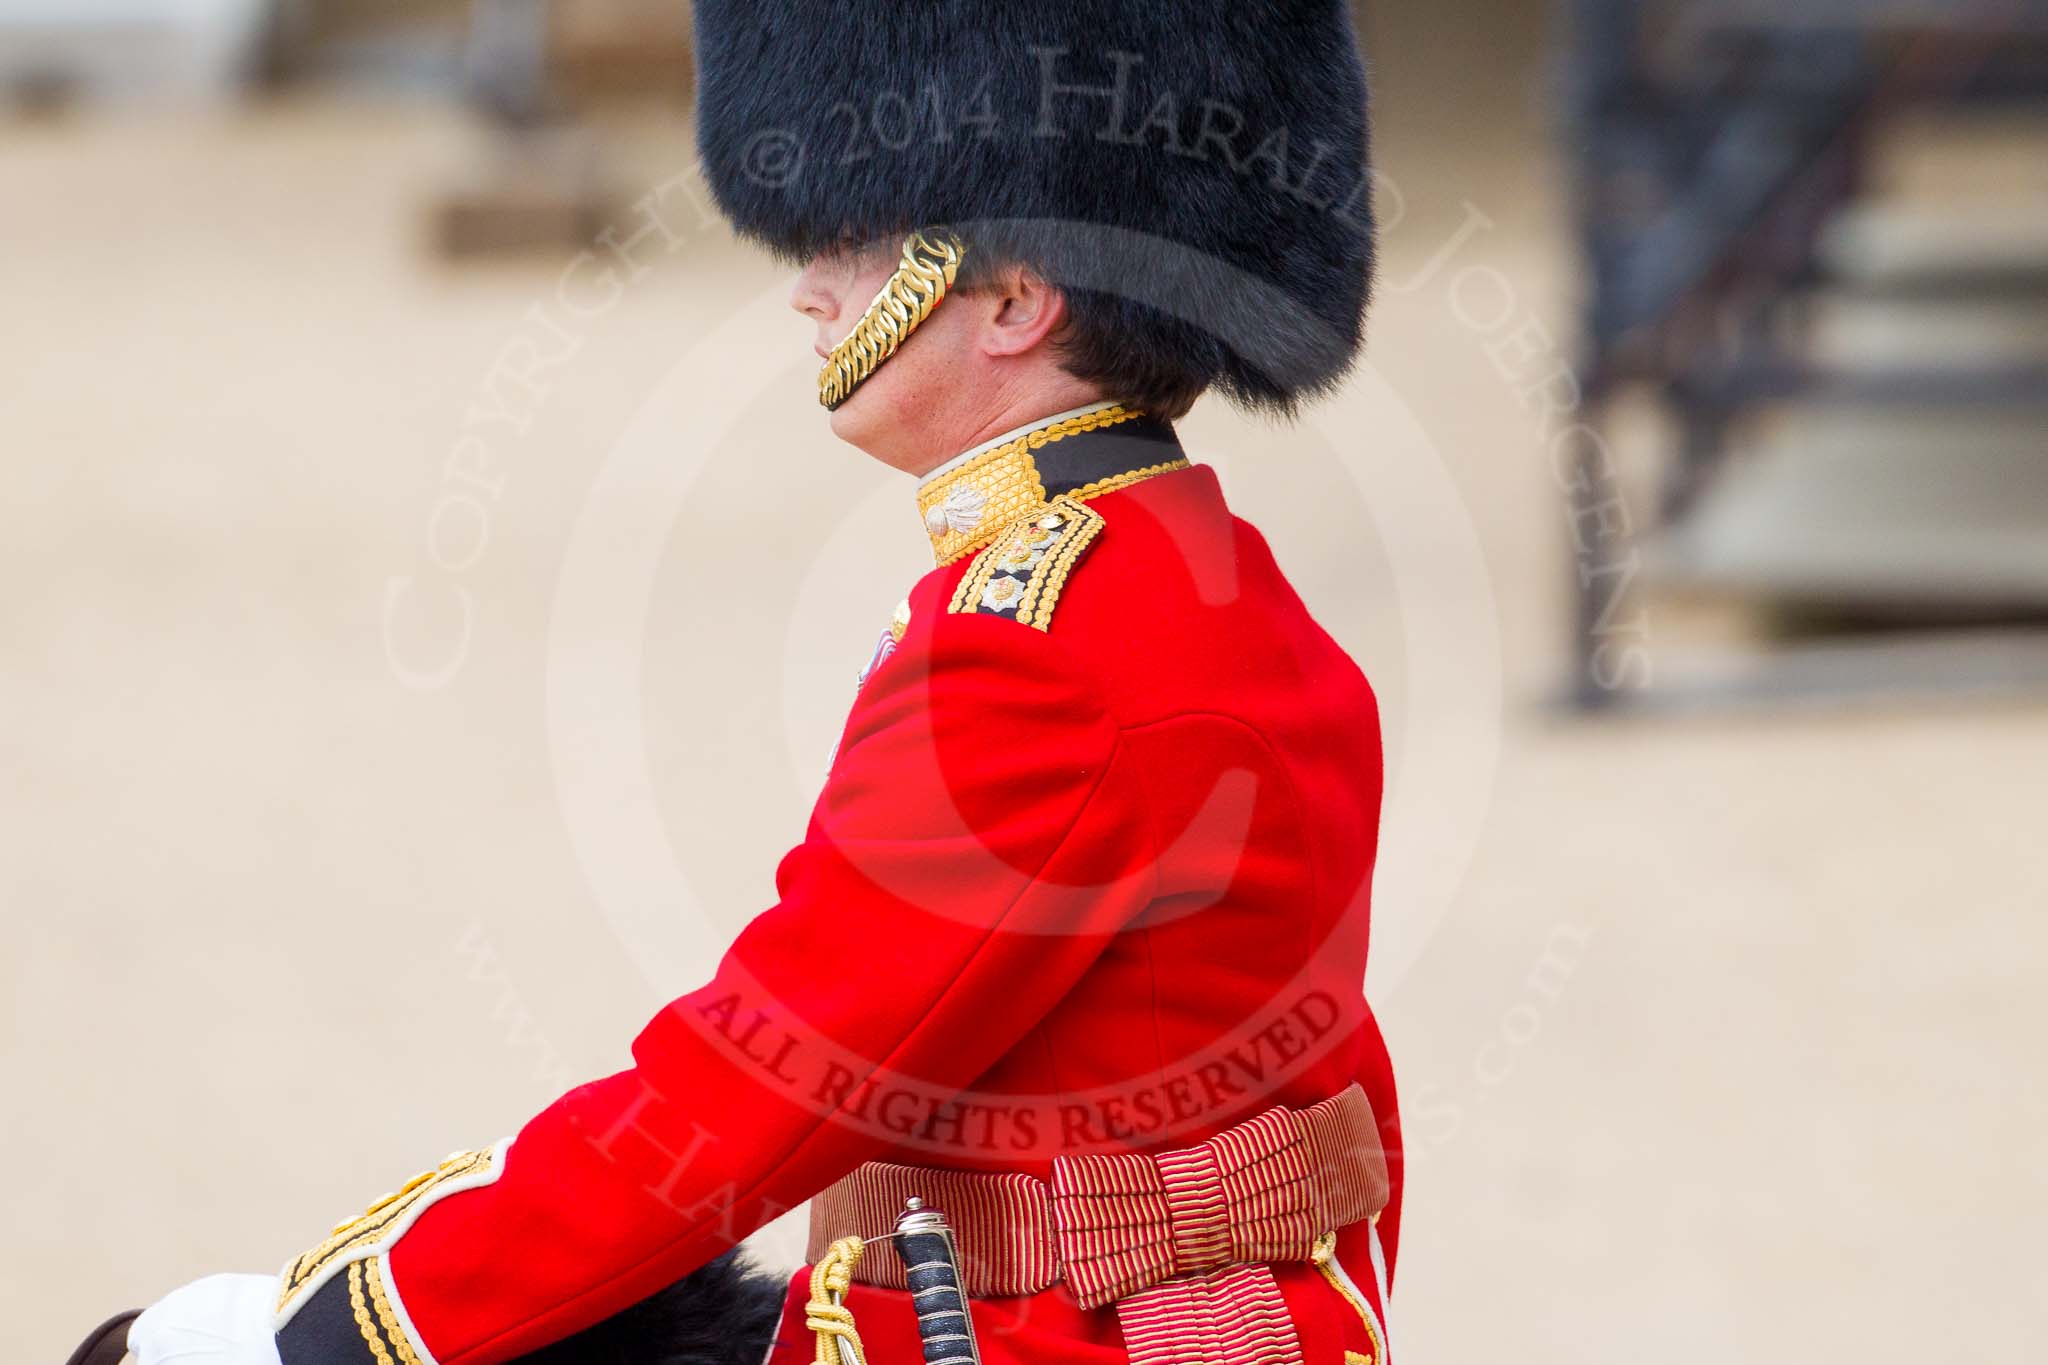 Trooping the Colour 2014.
Horse Guards Parade, Westminster,
London SW1A,

United Kingdom,
on 14 June 2014 at 10:35, image #217